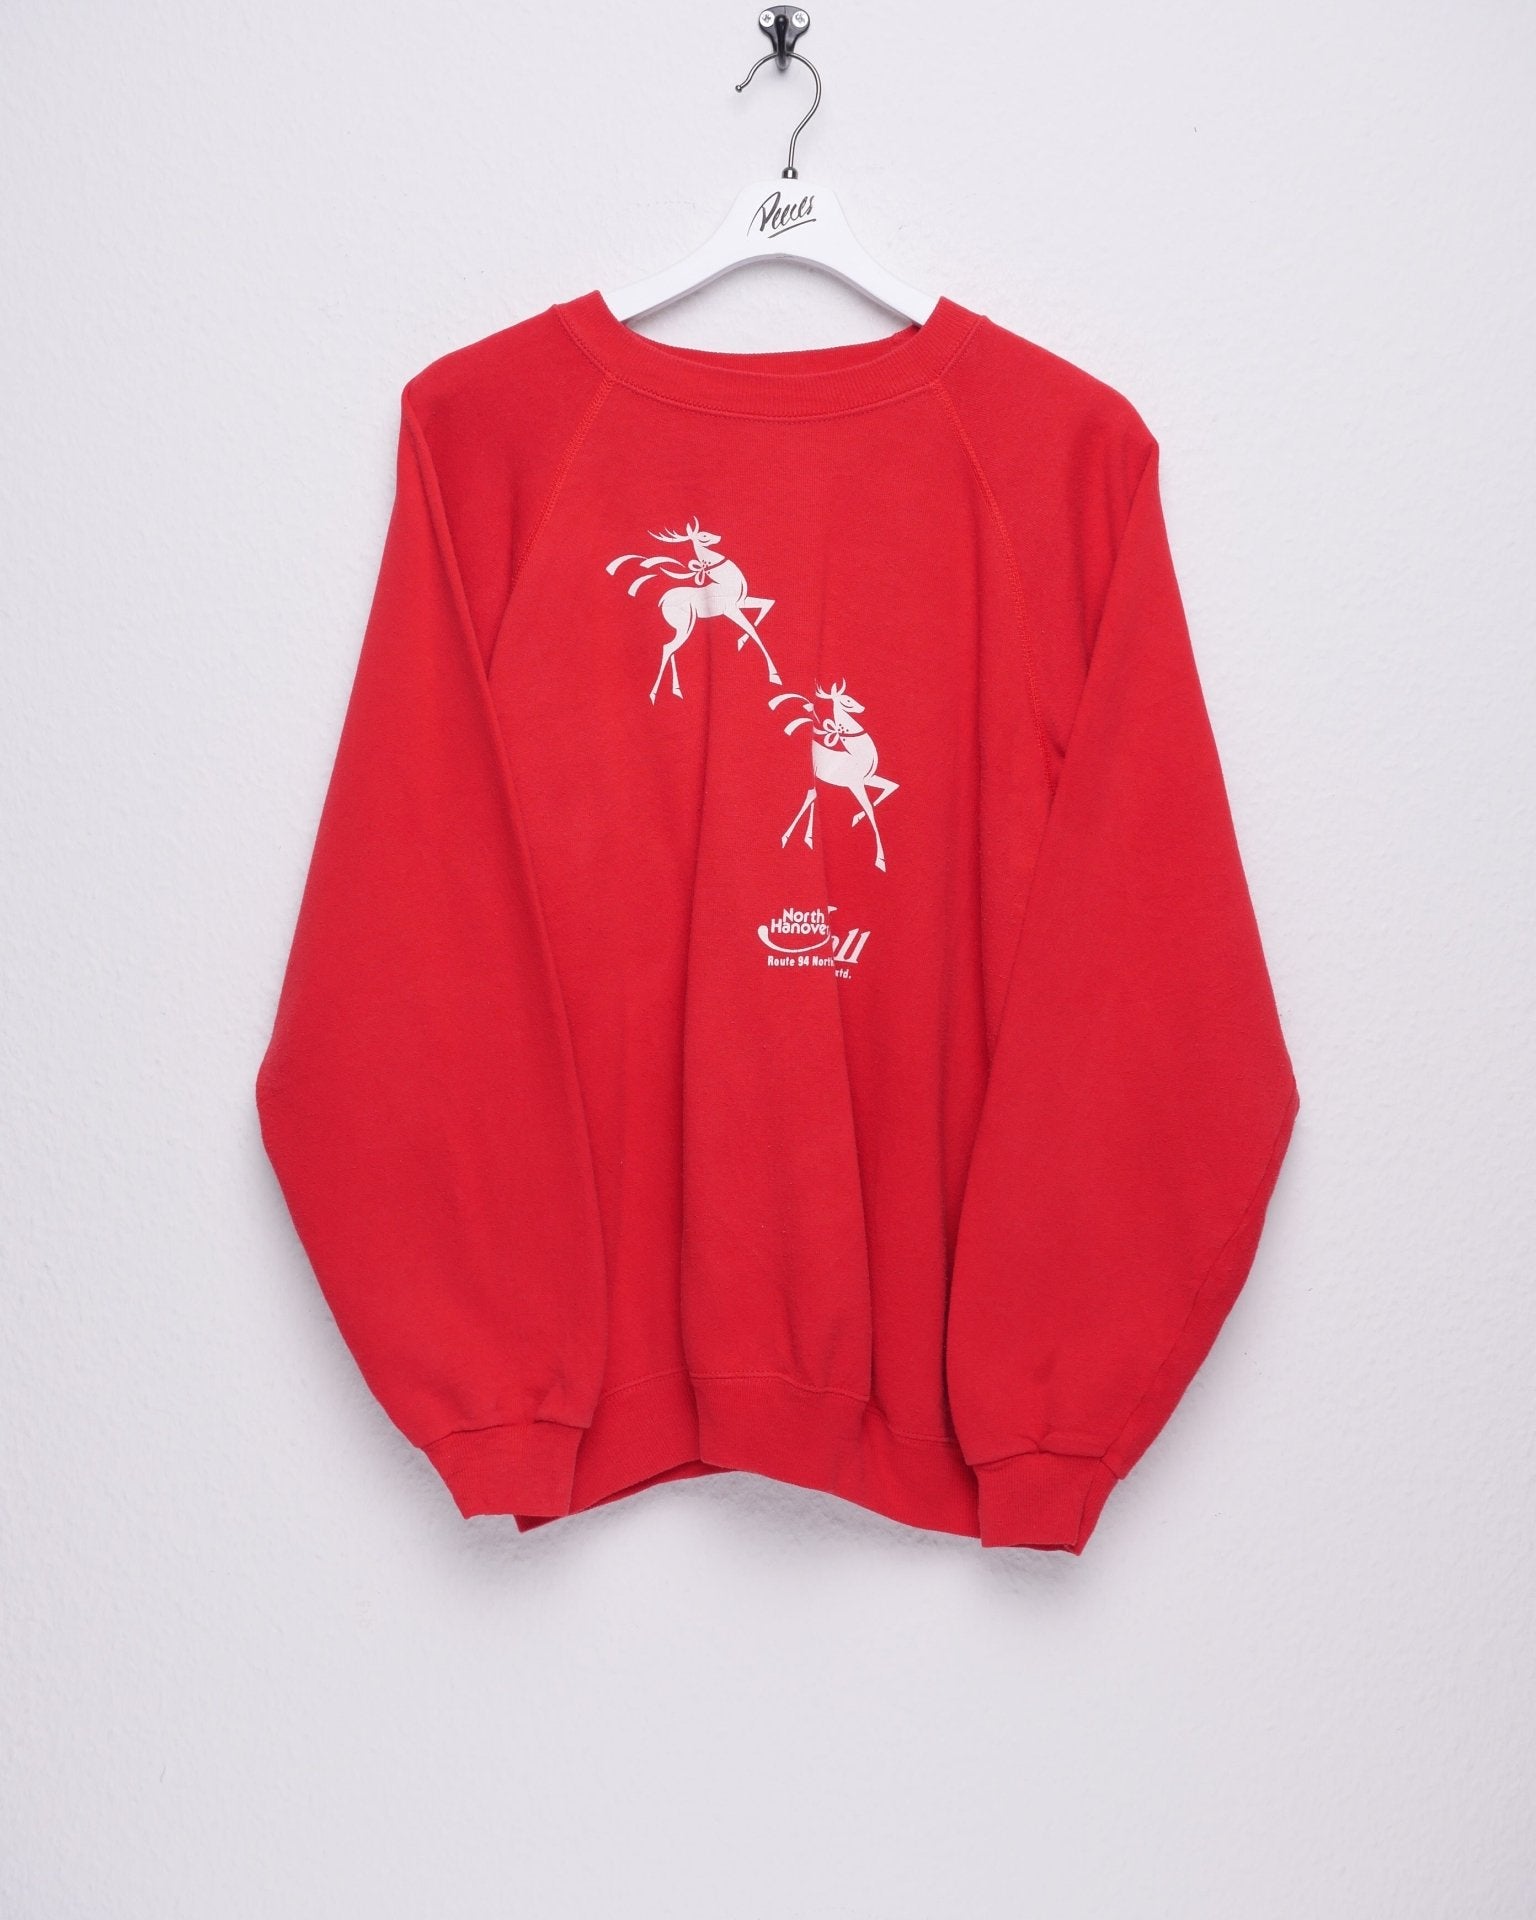 'North Hanover Mall' printed Graphic red Sweater - Peeces